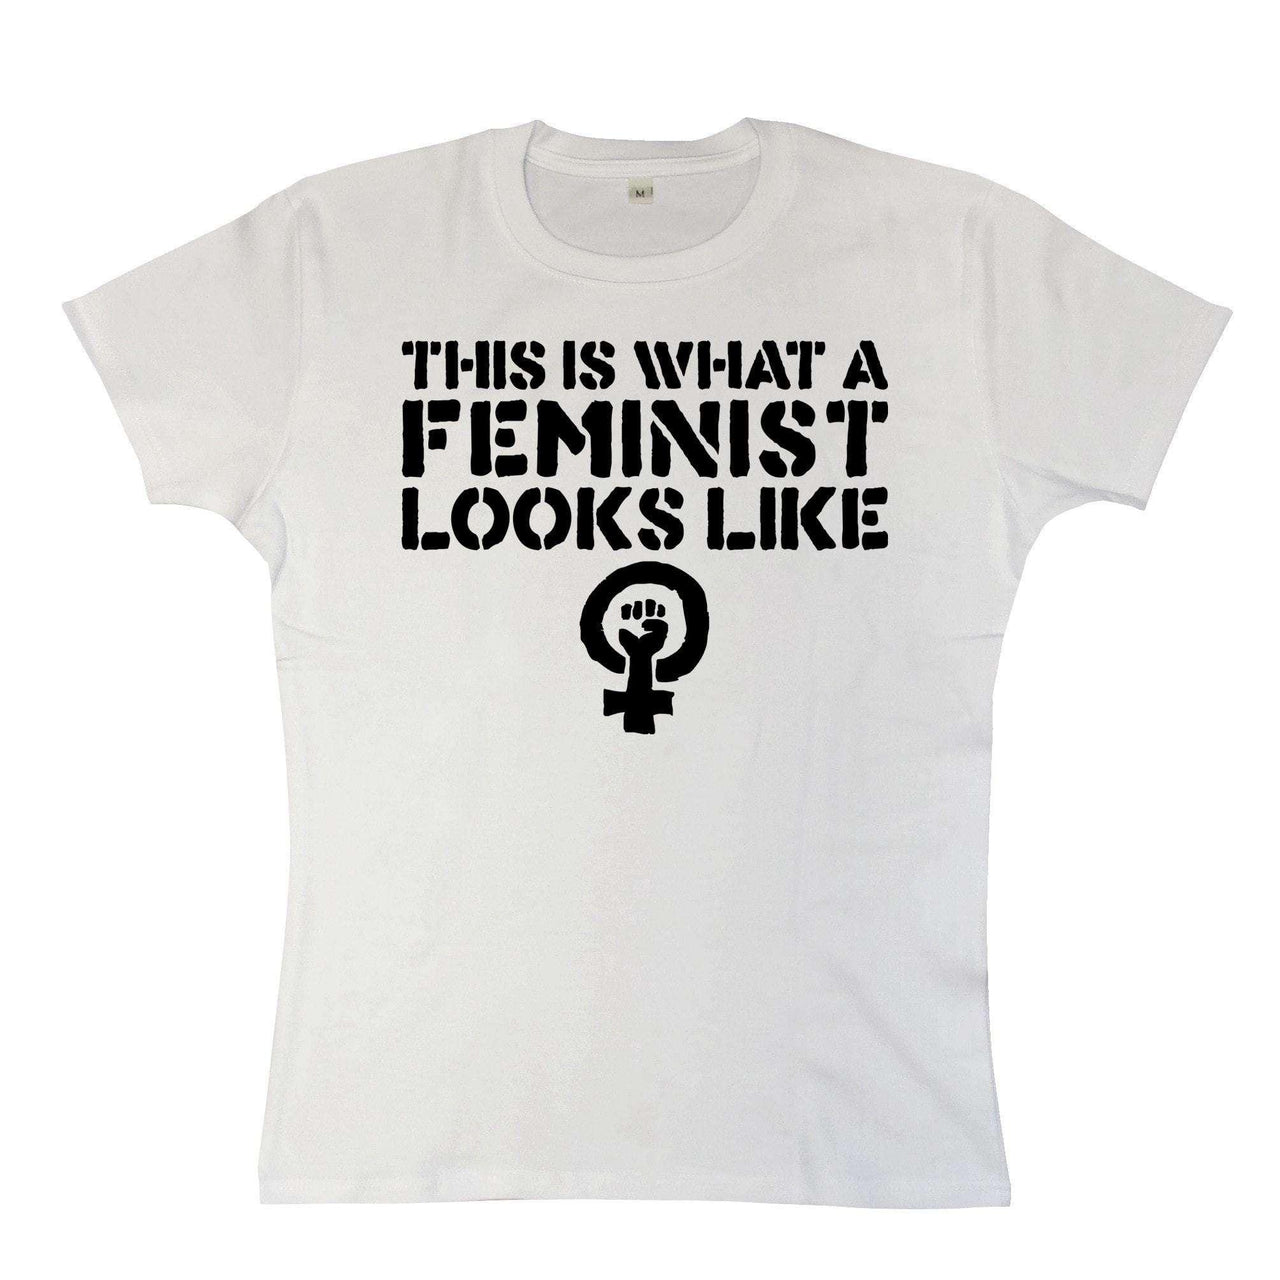 This Is What A Feminist Looks Like Womens Fitted T-Shirt 8Ball